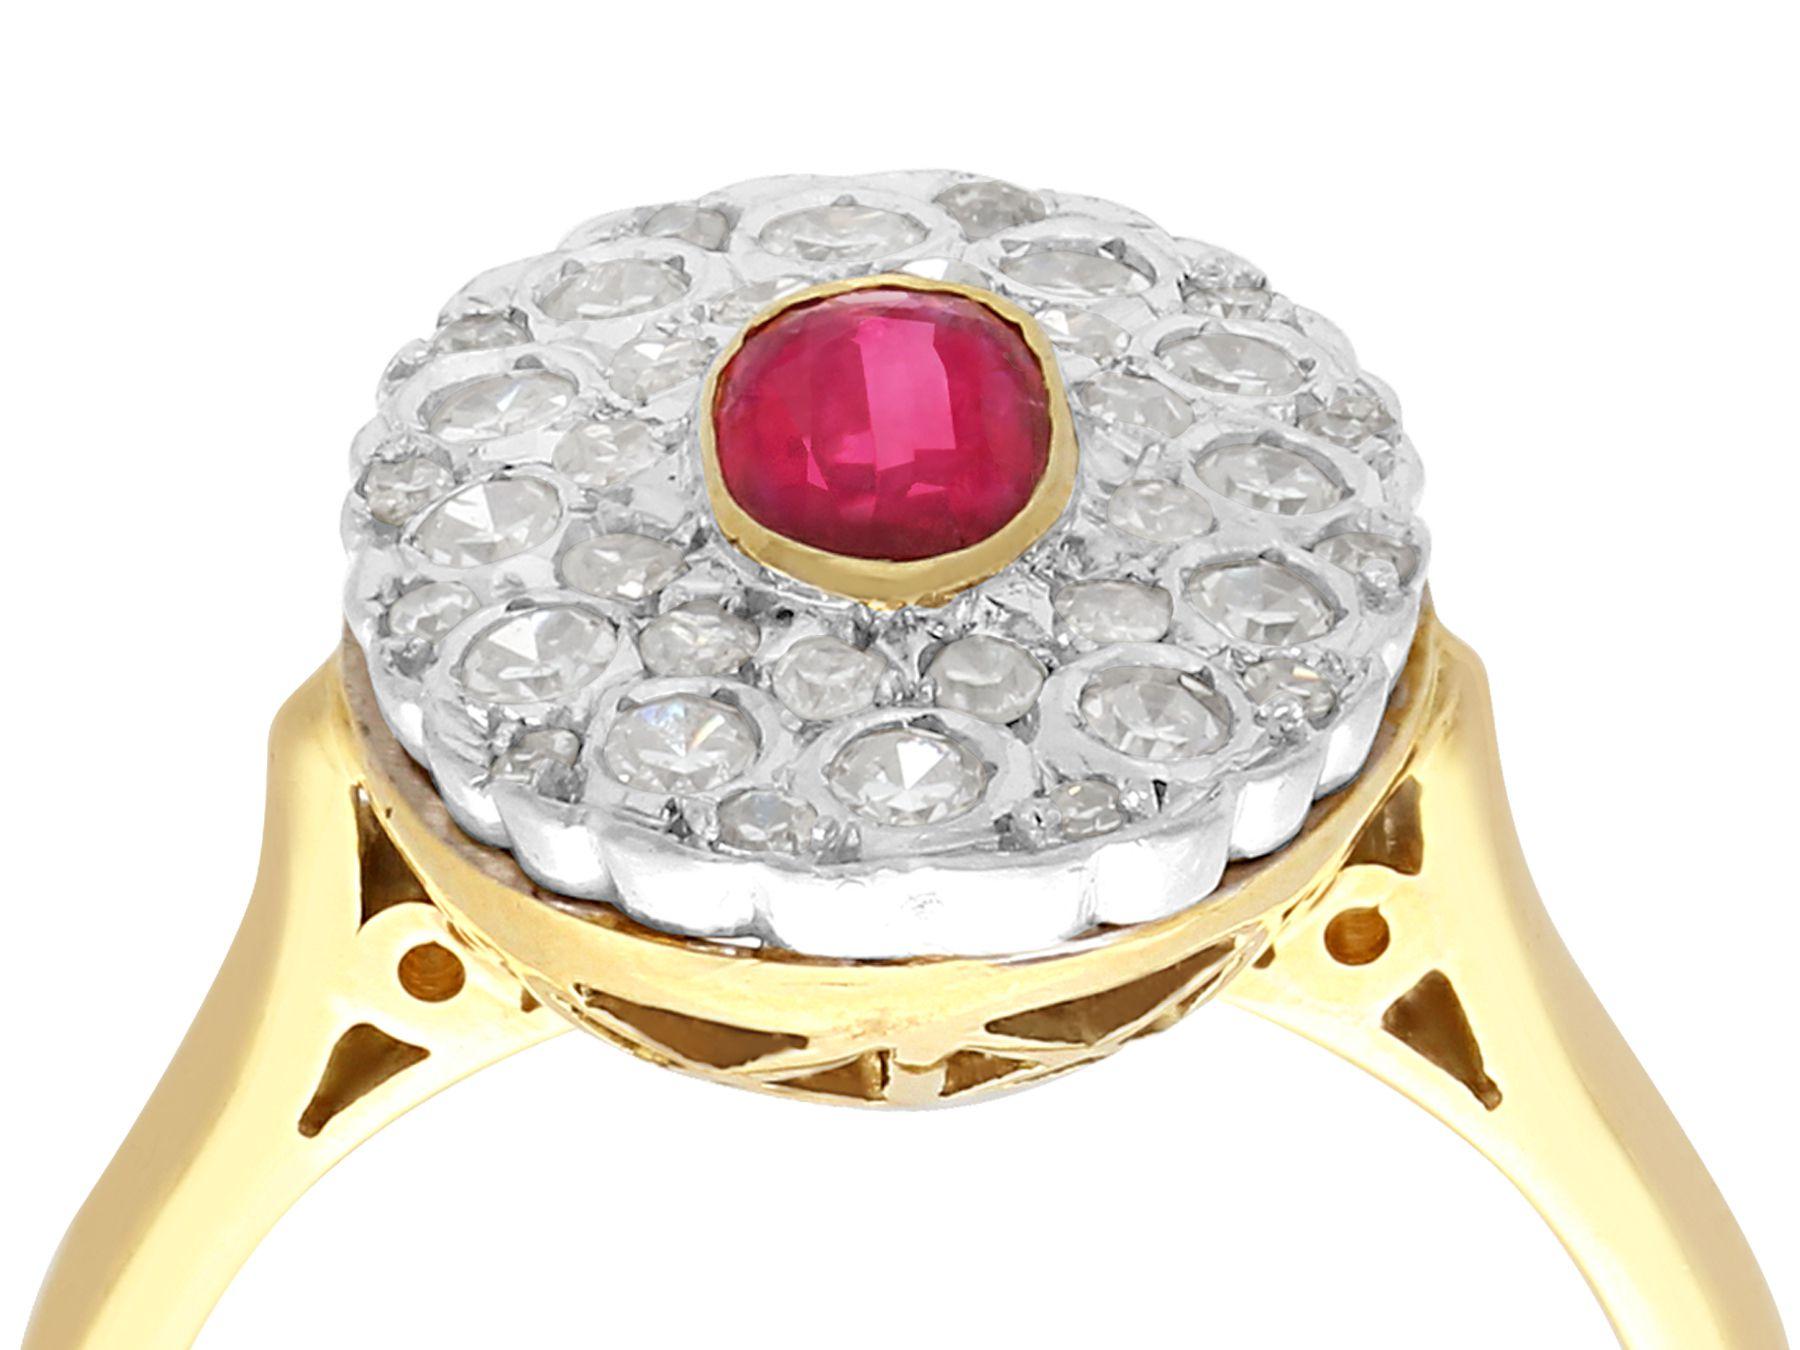 An impressive vintage 0.39Ct diamond and 0.42Ct ruby, 18k yellow gold and 18k white gold set cluster ring; part of our vintage jewelry collections.

This fine and impressive 1950s oval cut ruby and diamond ring has been crafted in 18k yellow gold